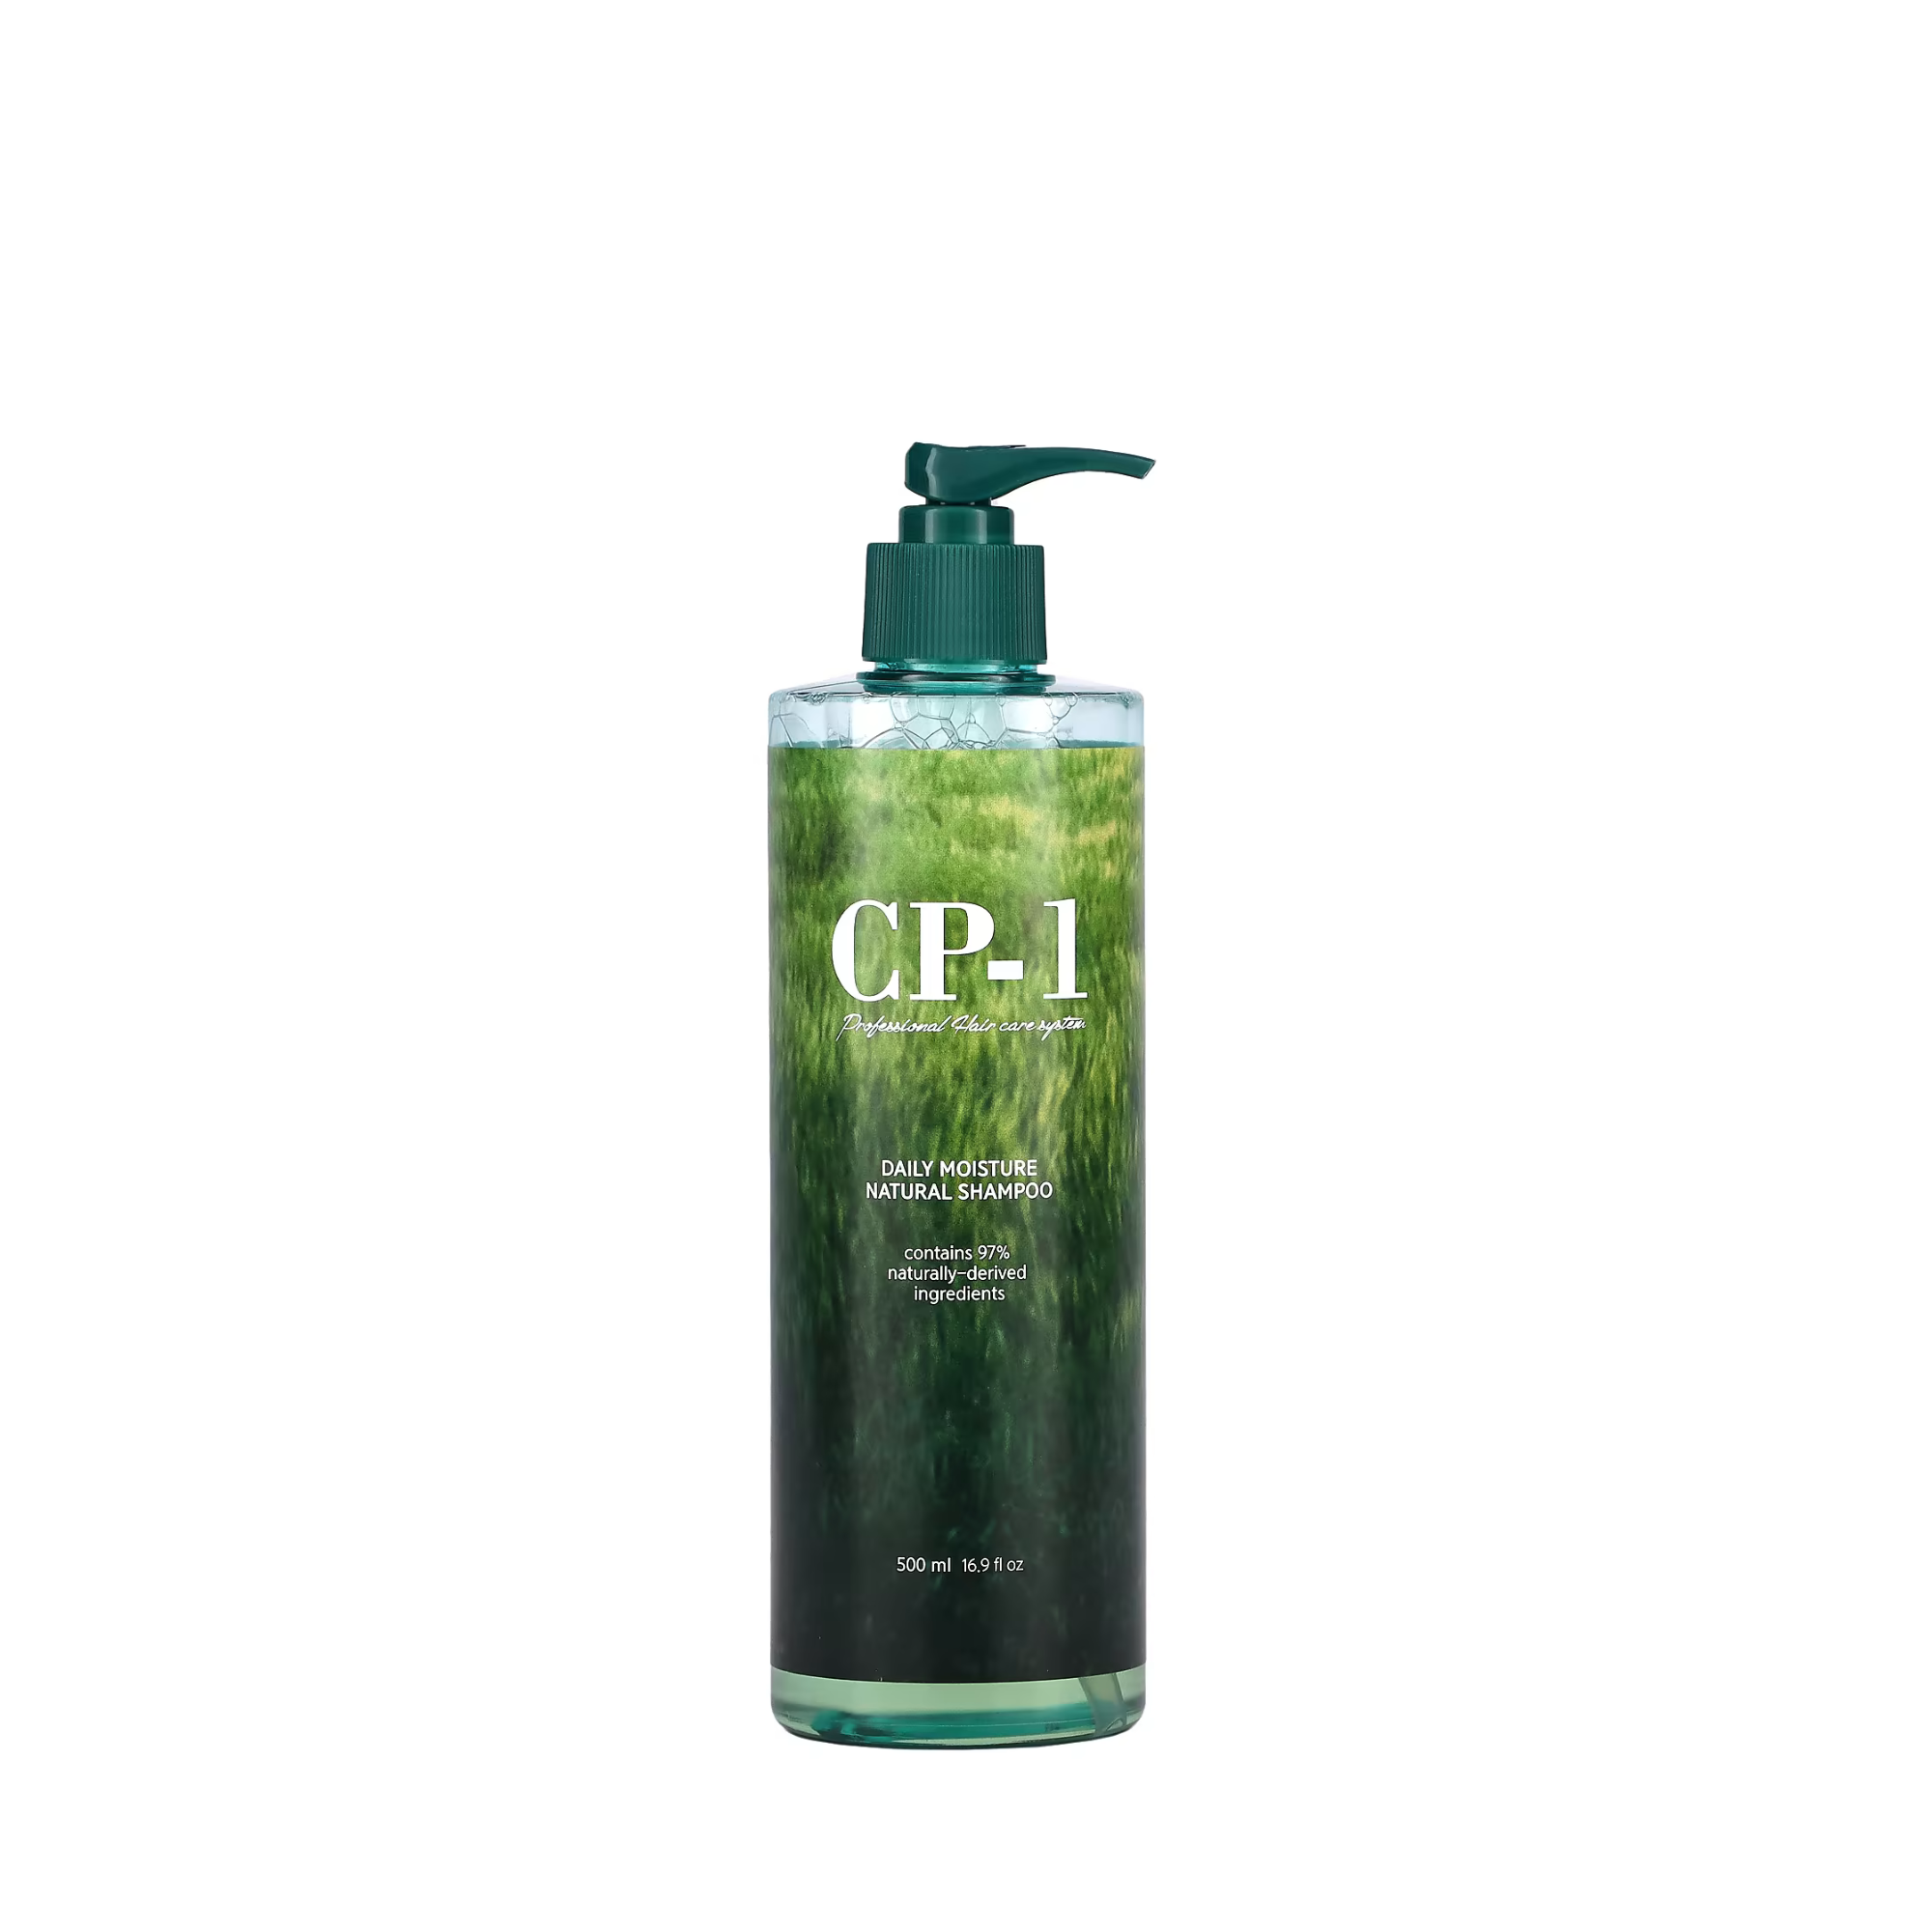 Natural moisturizing shampoo with proteins and green tea by Esthetic House (Esthetic House CP-1 Daily Moisture Natural Shampoo)